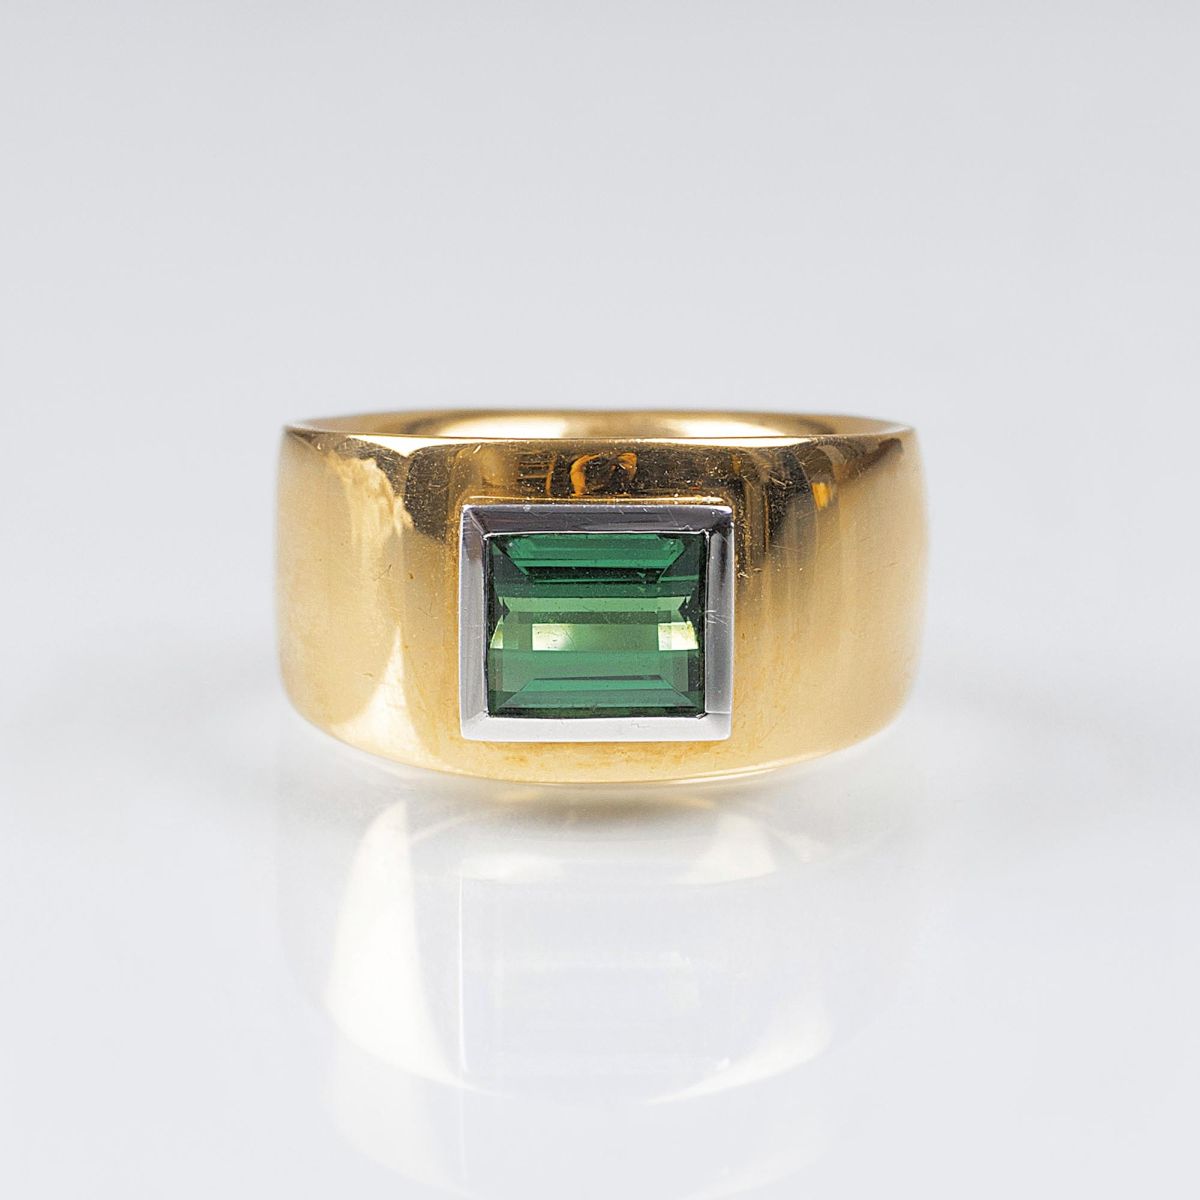 A Gold Ring with Tourmaline